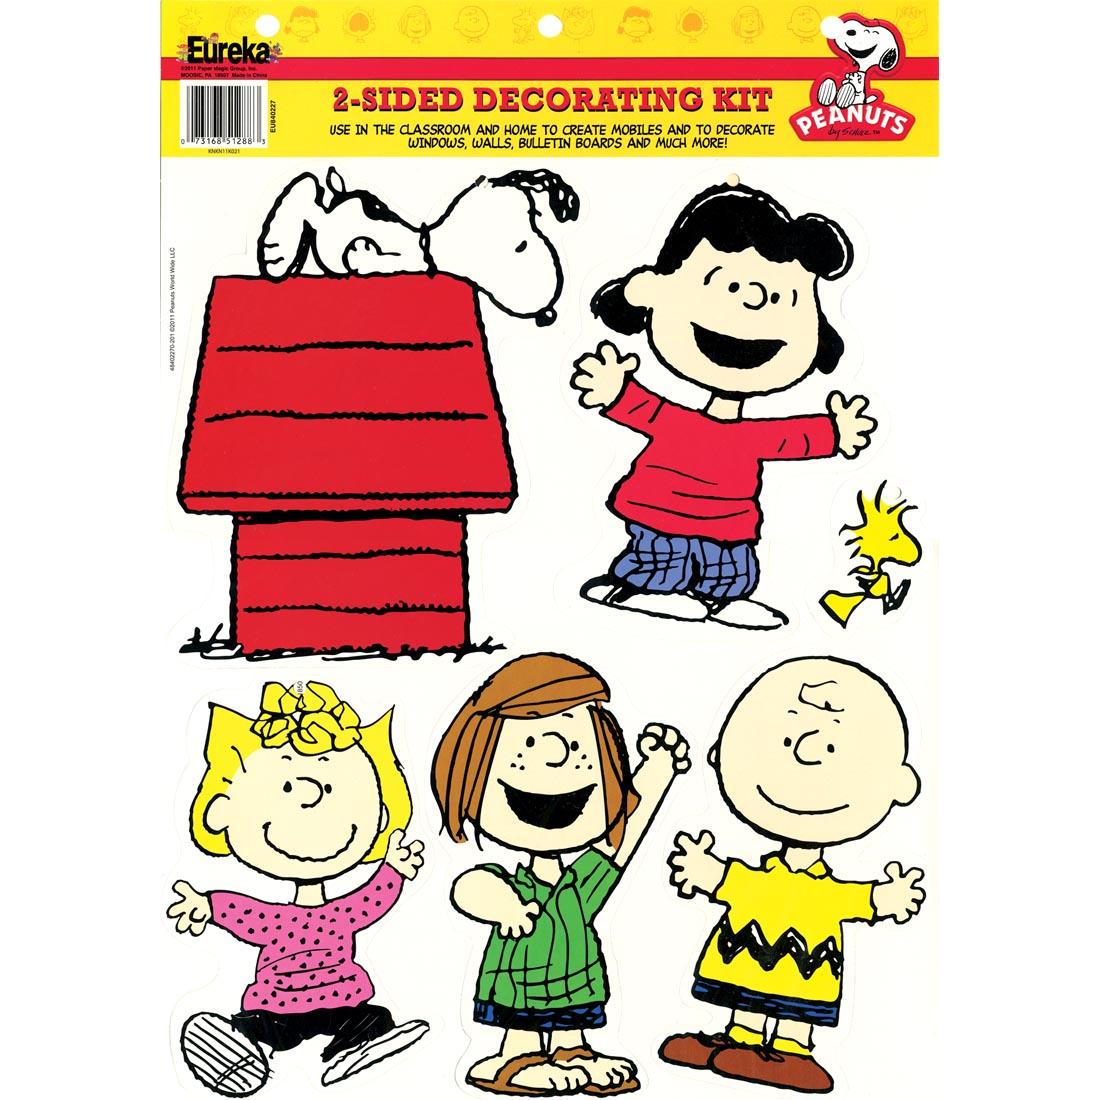 Peanuts Classic Characters 2-Sided Decorating Kit by Eureka